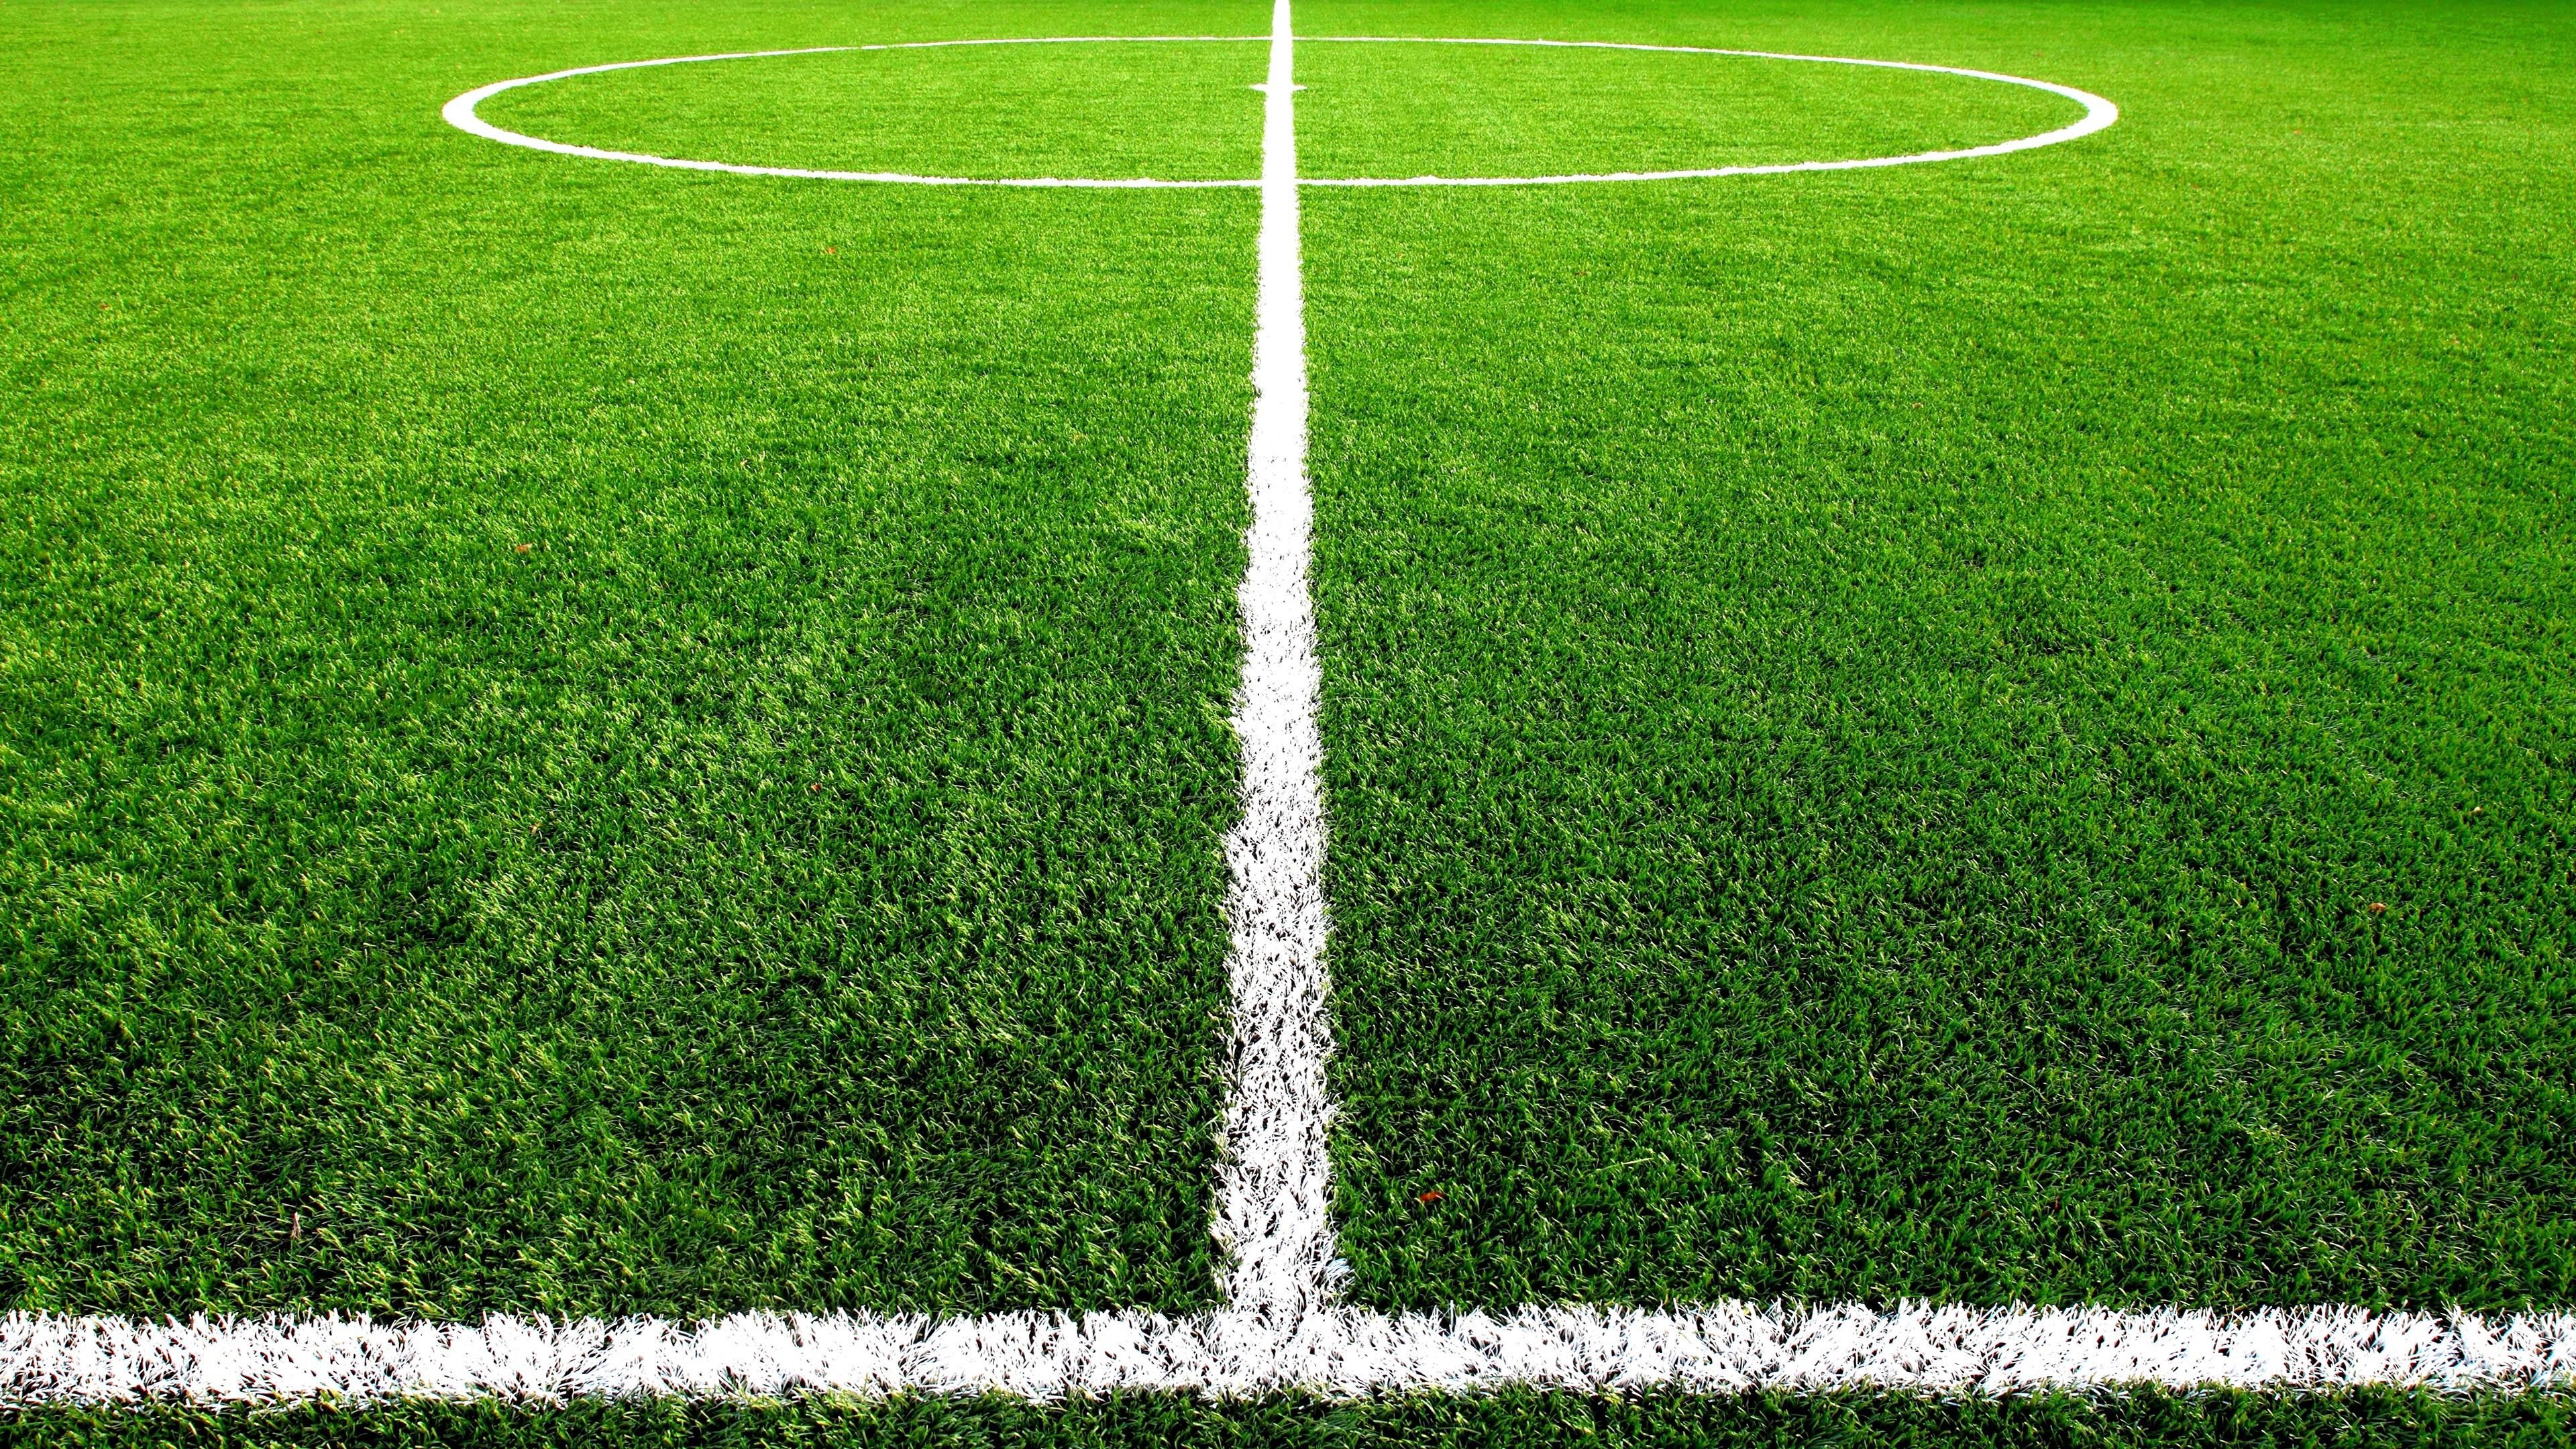 3840x2160 3840x2160 Artificial Grass With White Lines For Football Football Grass Hd Hd Wallpaper Background Download